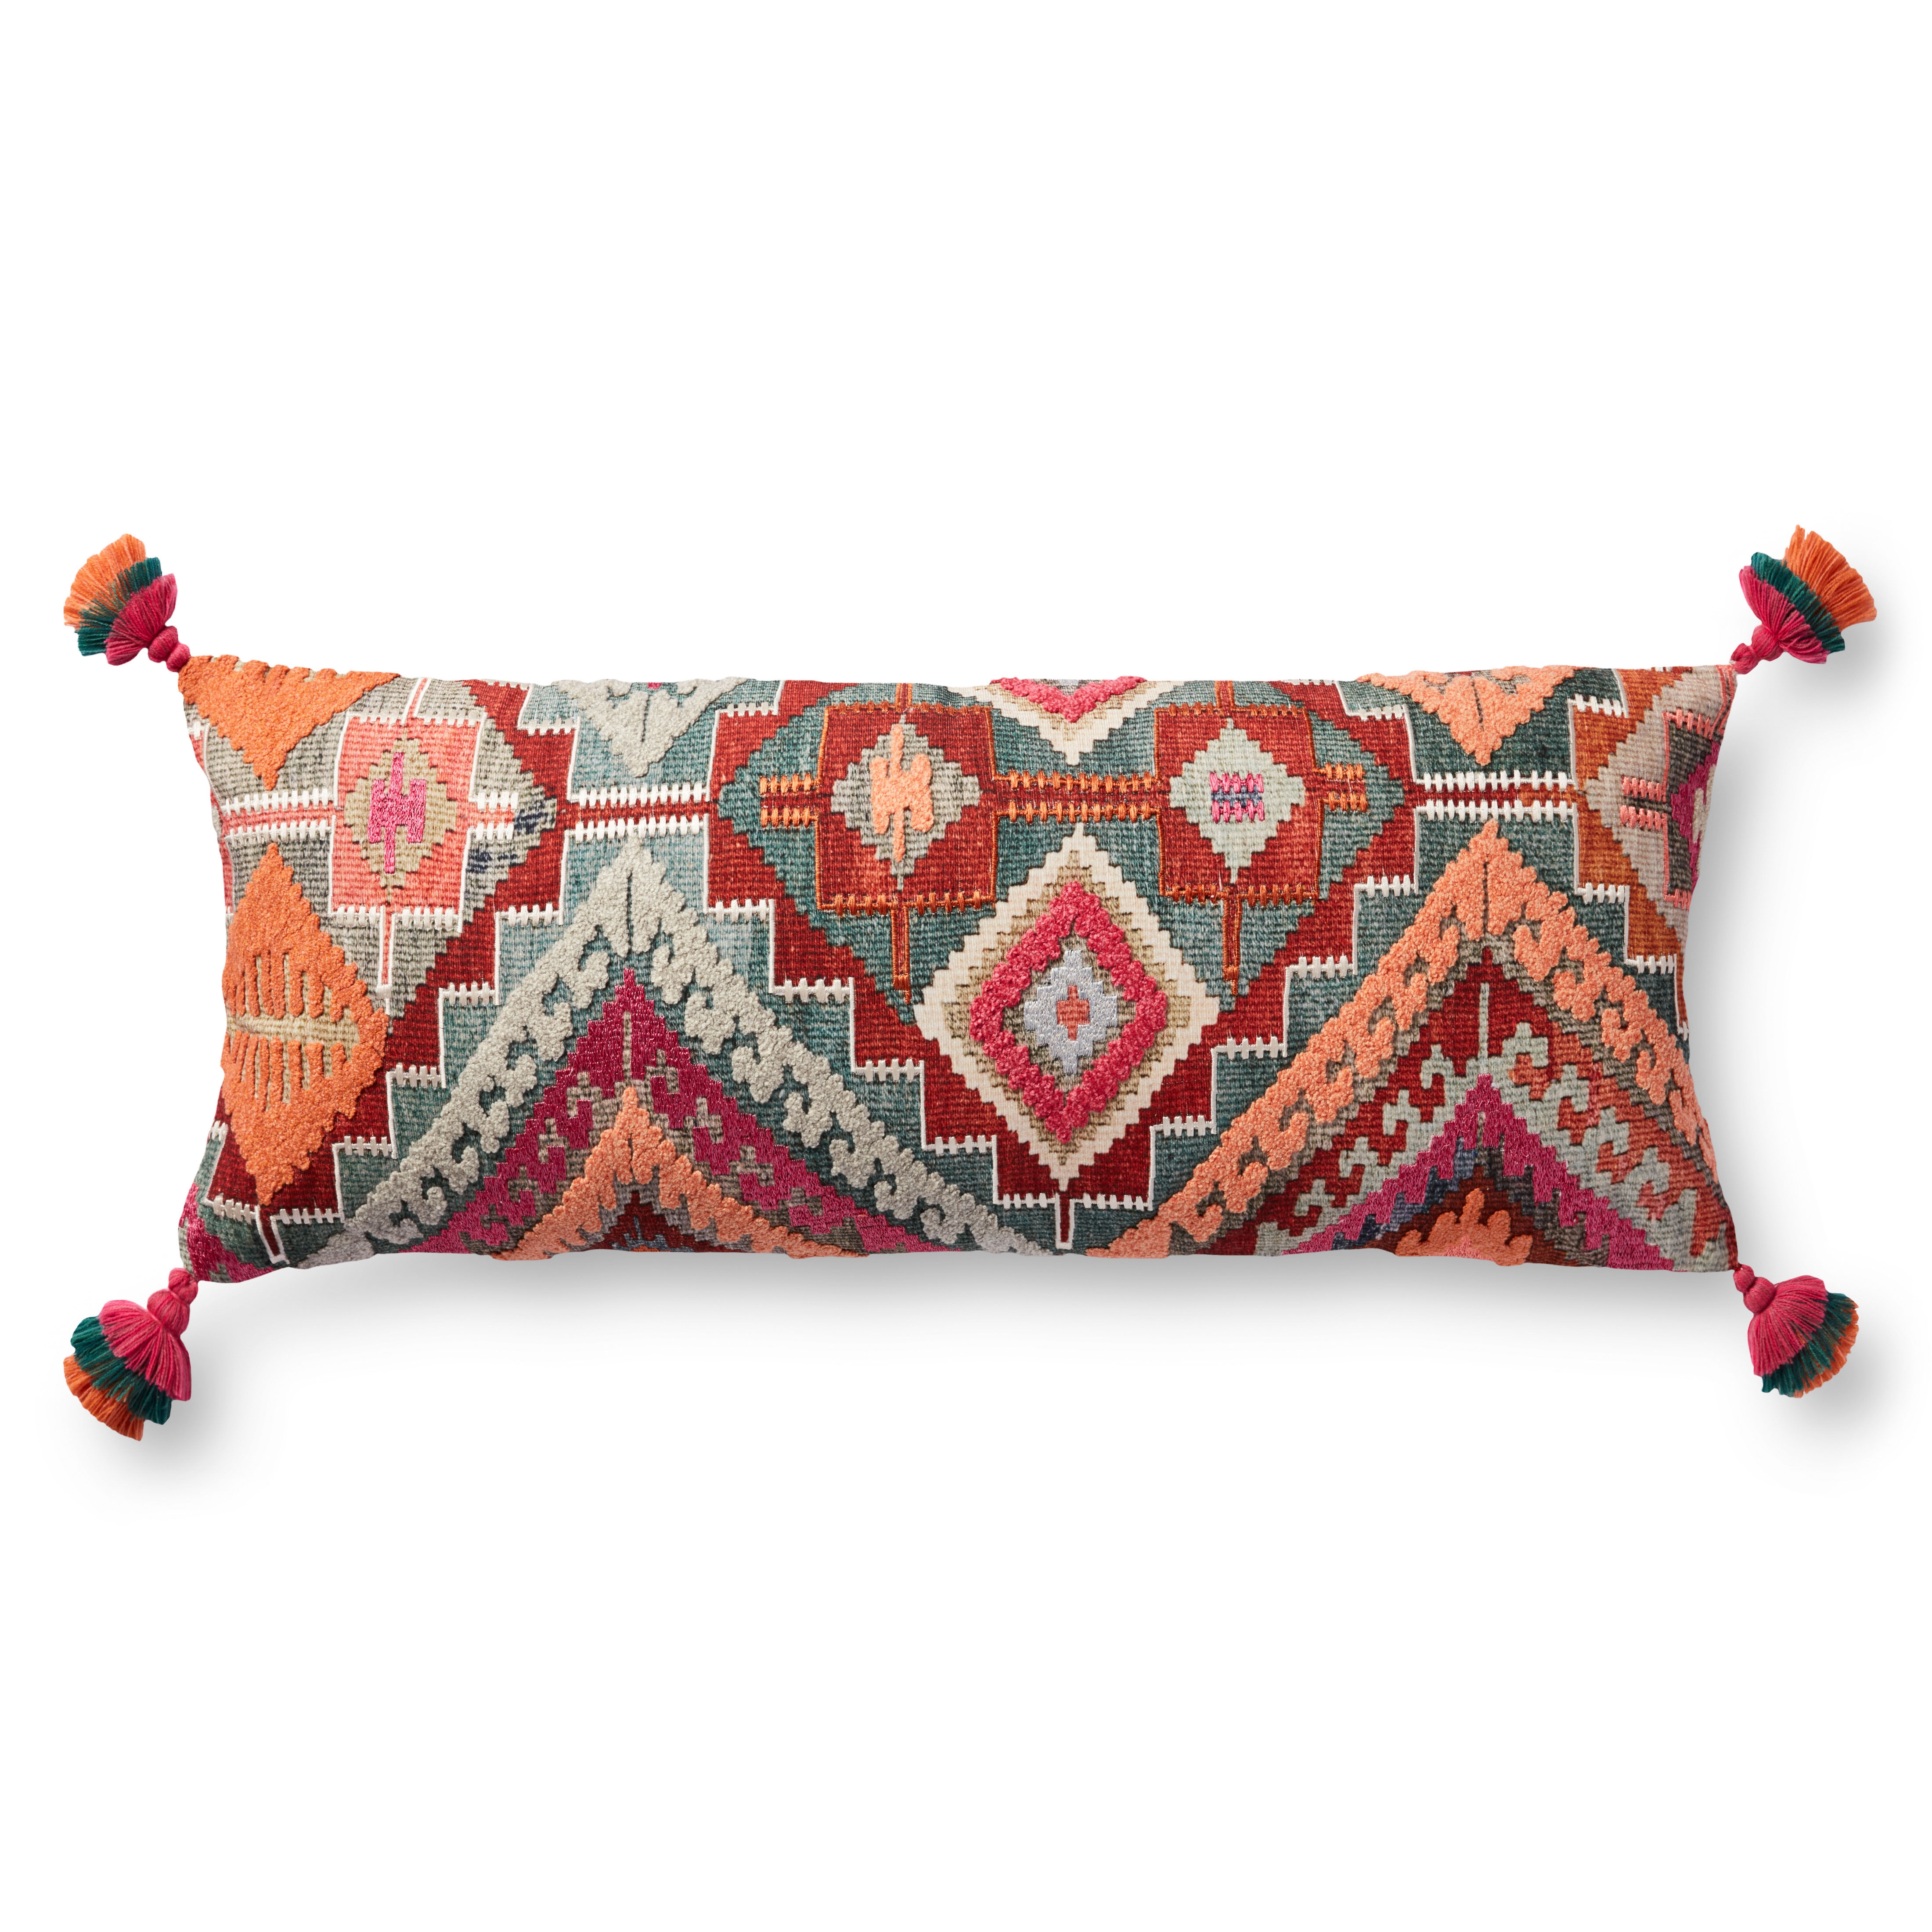 Justina Blakeney x Loloi Pillows P0954 Multi 13" x 35" Cover Only - Image 0